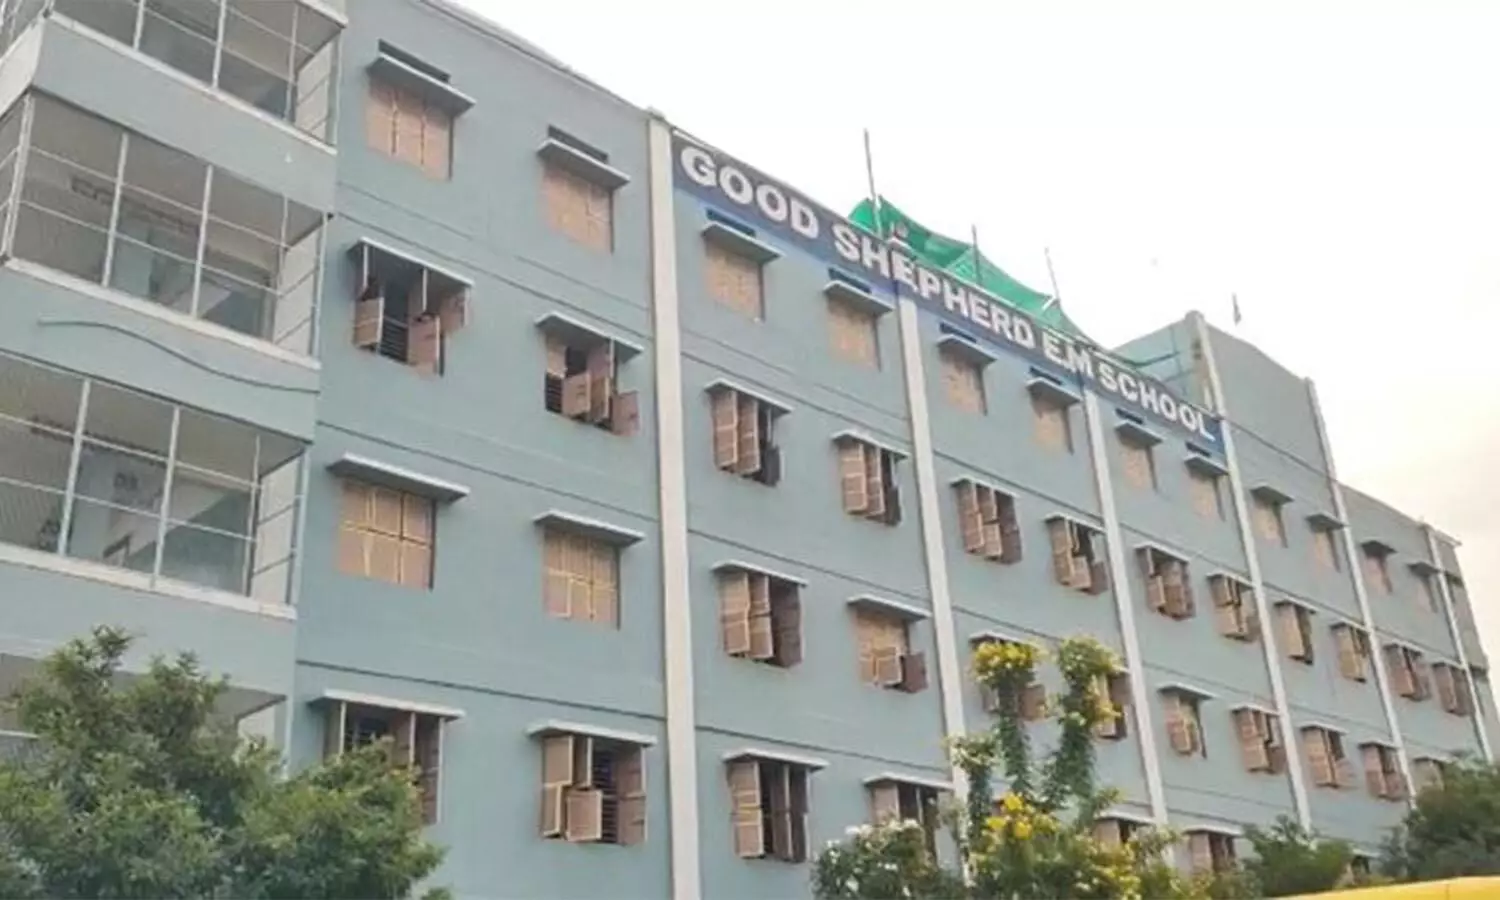 Fifth-class student jumps off school building in Nandyal